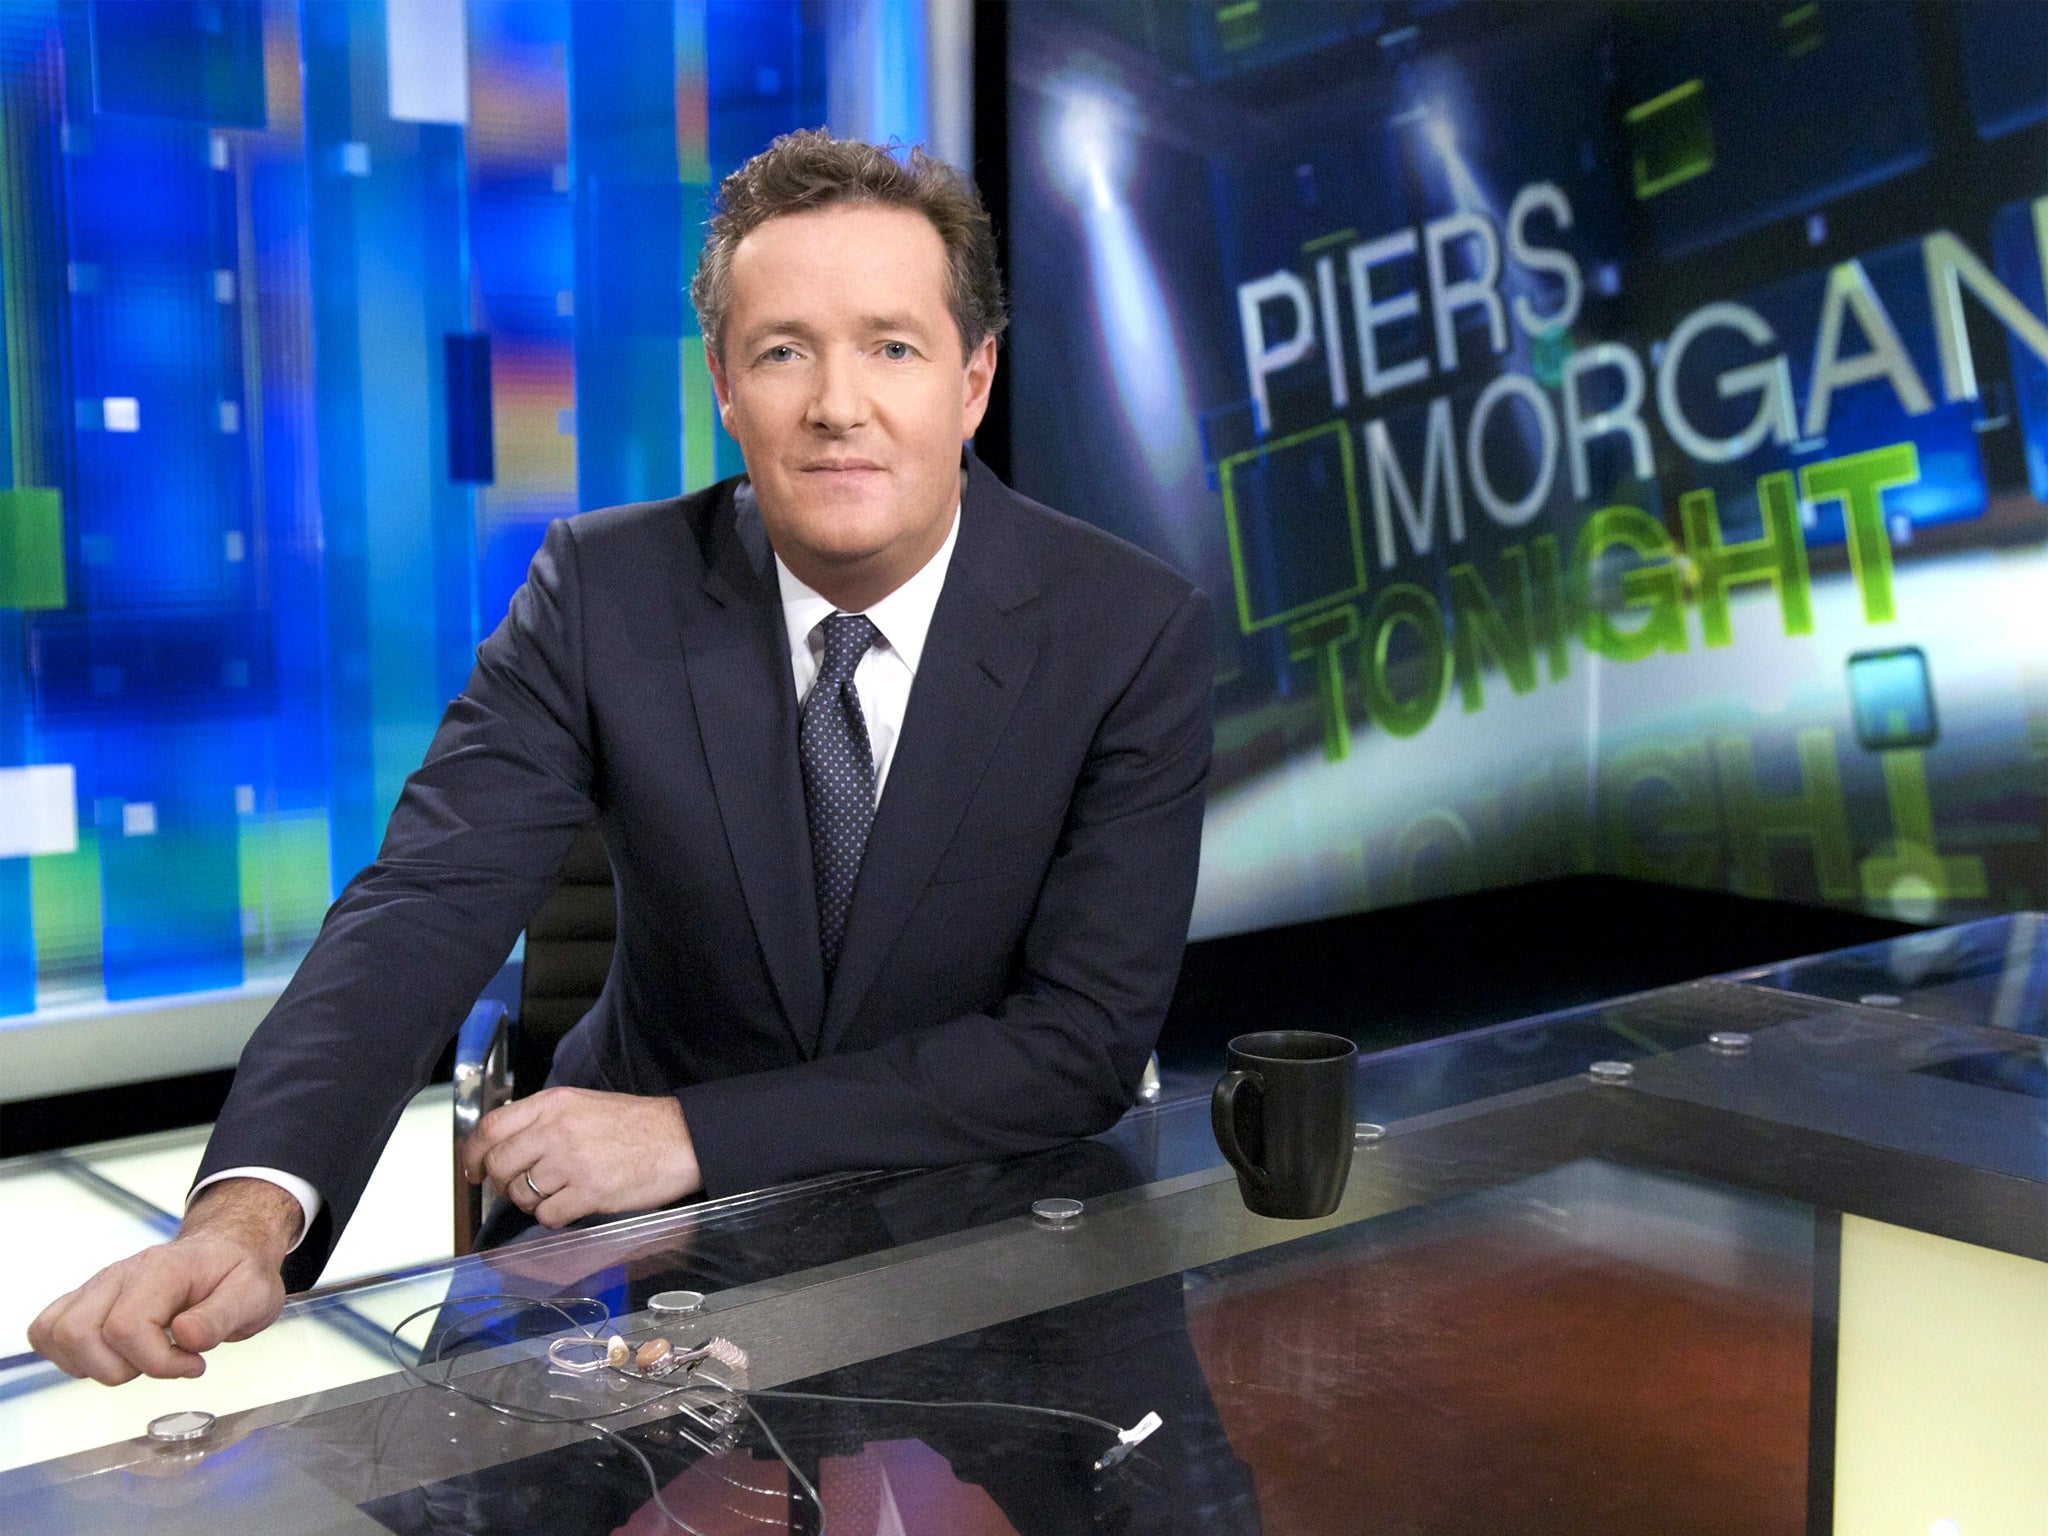 Less is Mor: CNN sacked Piers Morgan from his TV show after just three years